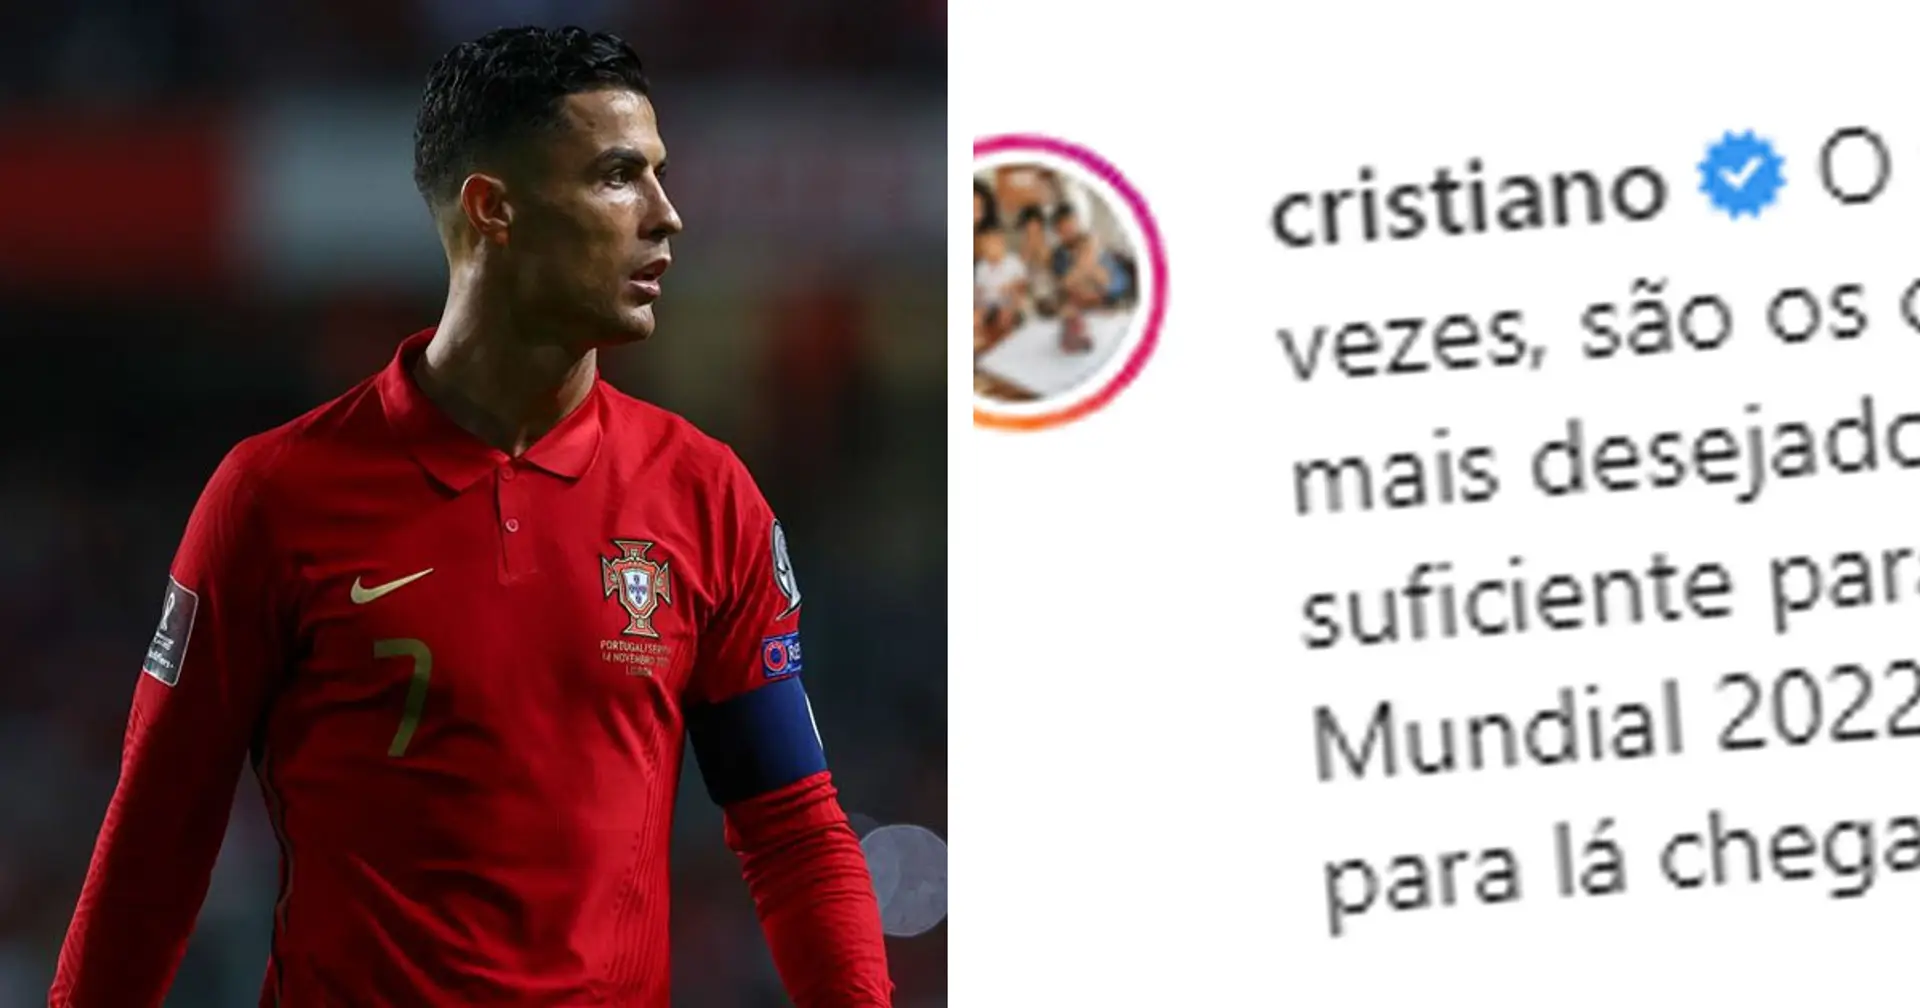 'Yesterday's result was tough': Ronaldo breaks silence as Portugal miss automatic World Cup qualification